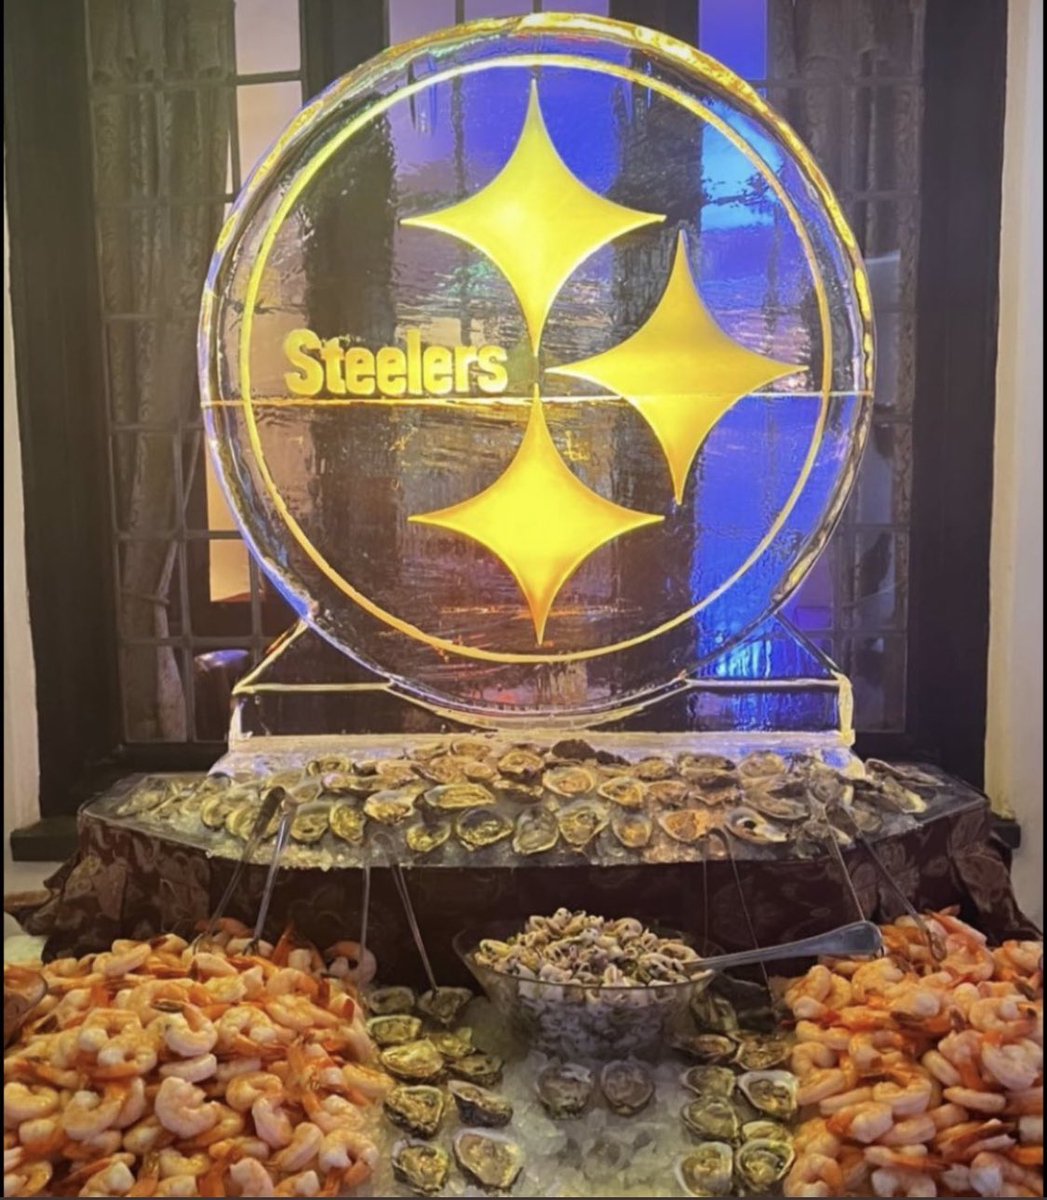 Kenny Pickett had a Steelers Ice Sculpture at his Wedding. #Steelers #NFL